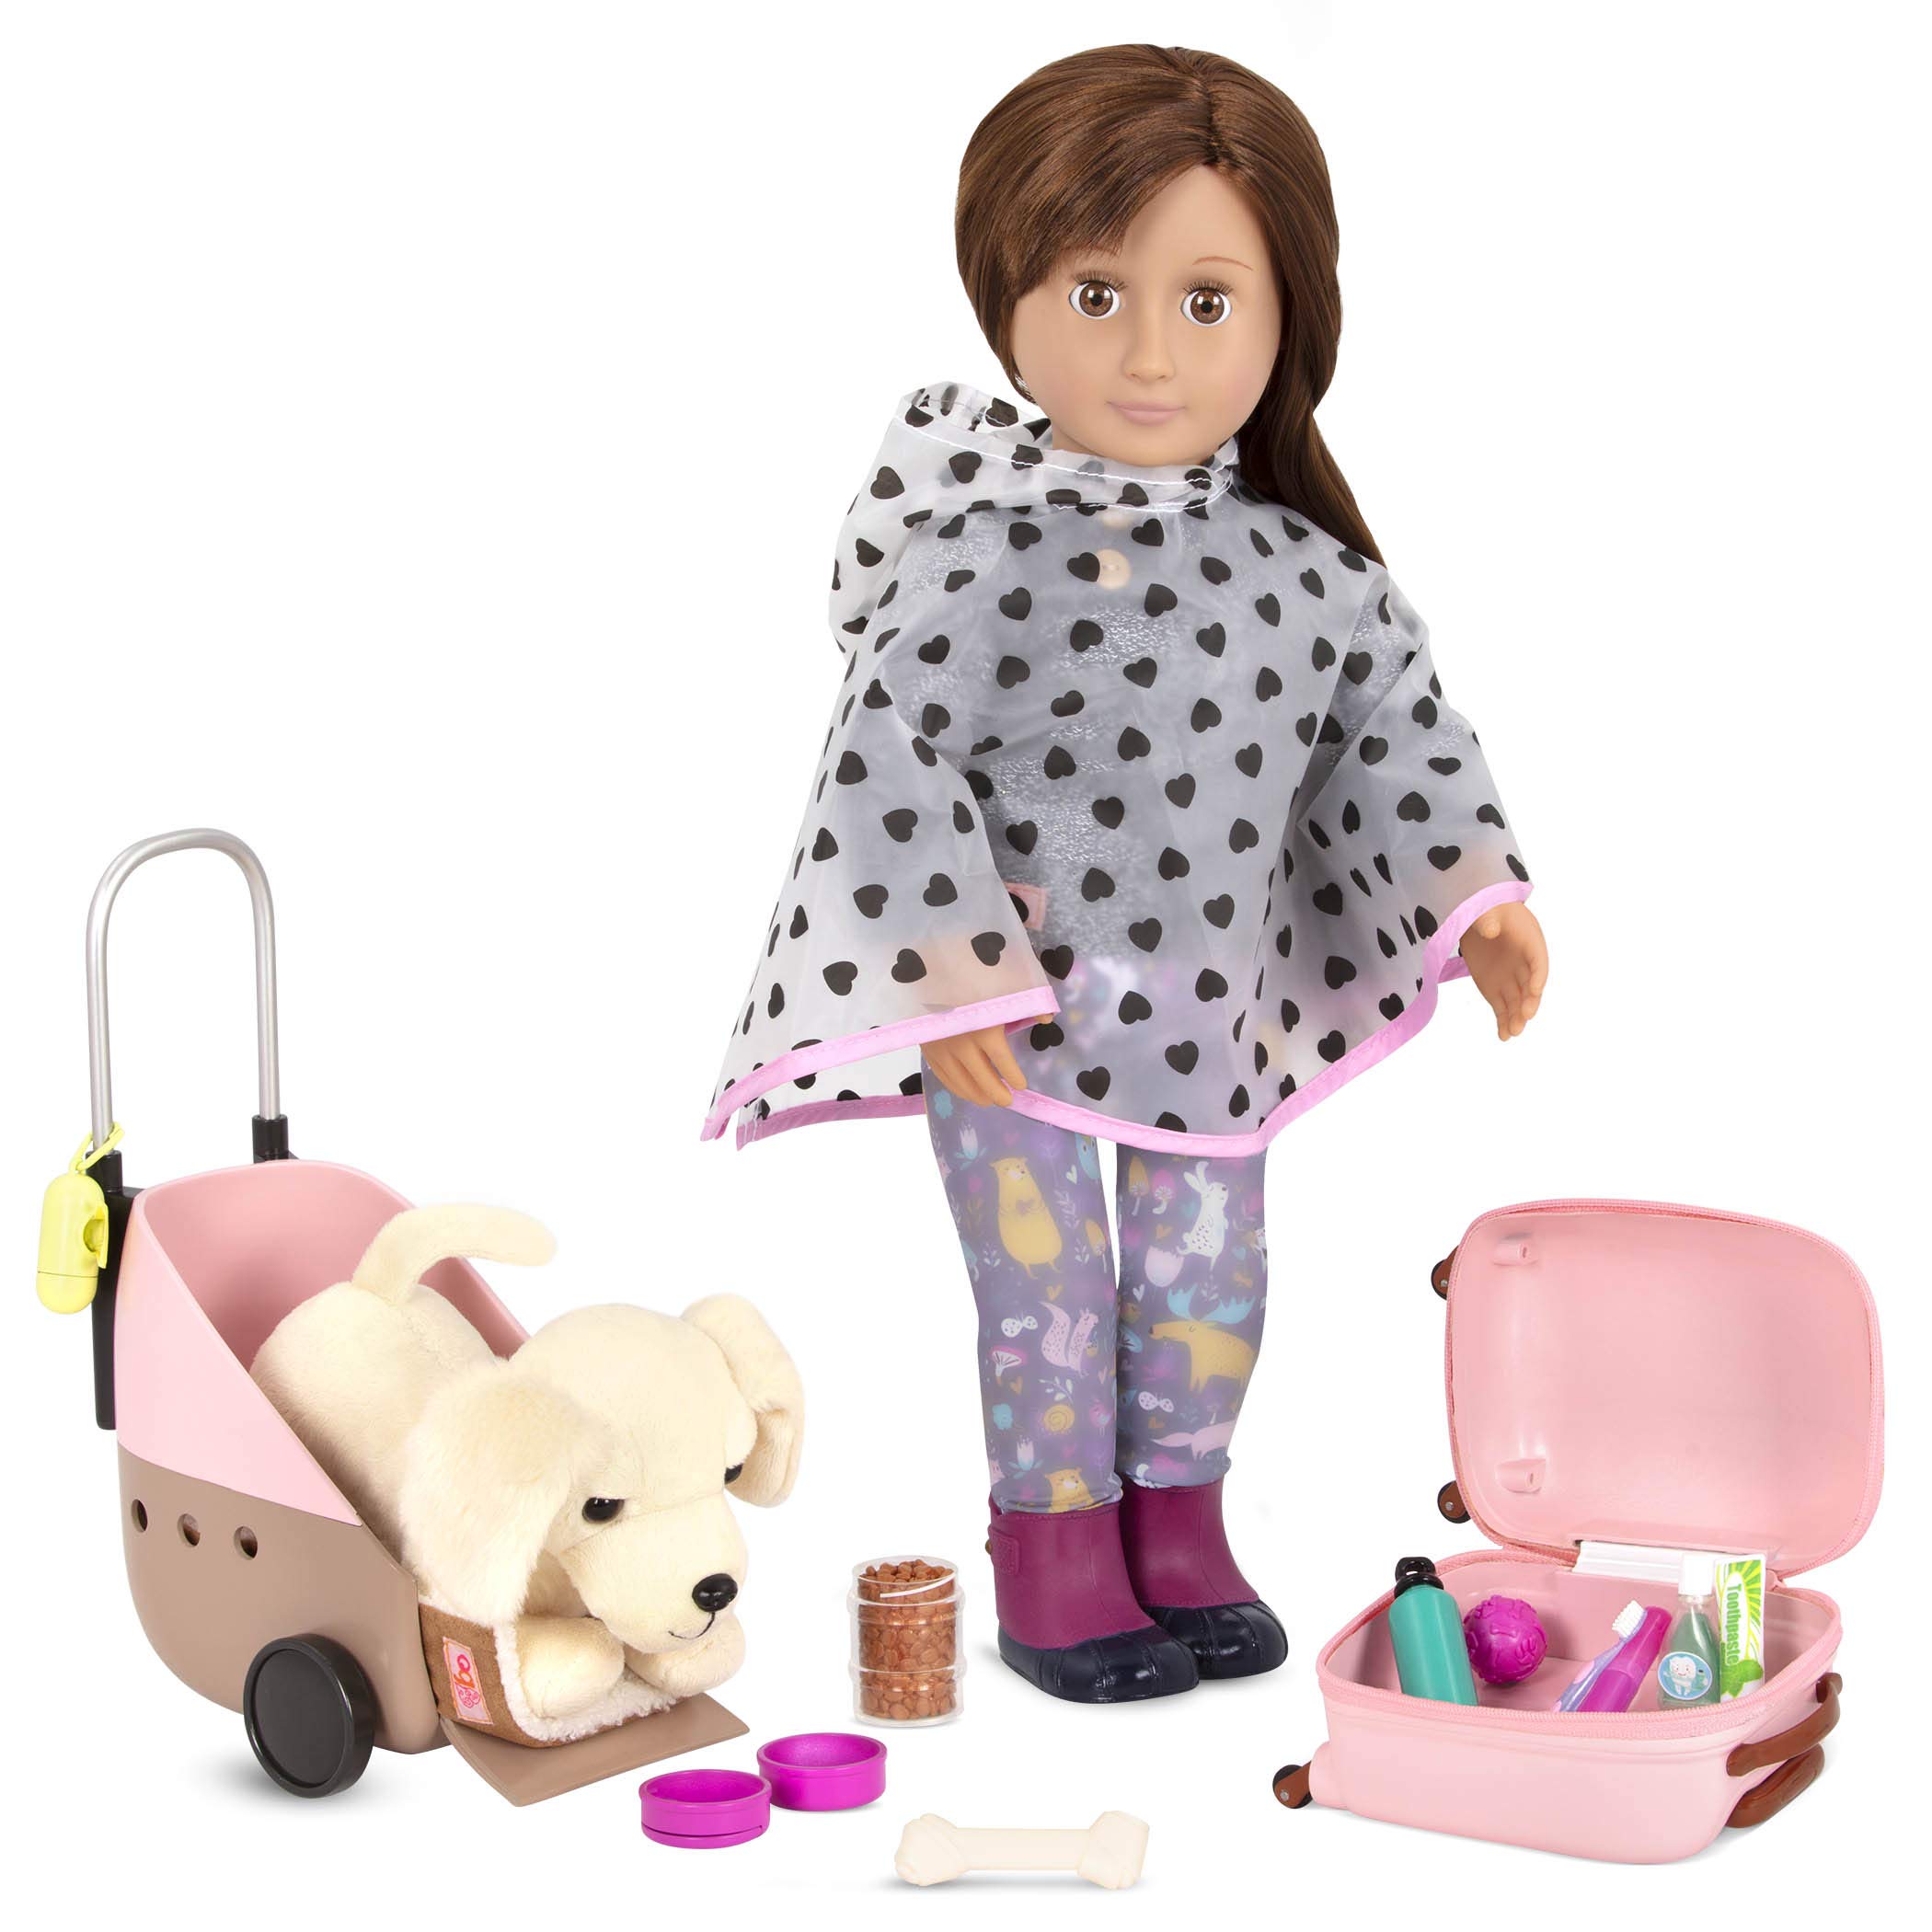 Our Generation- Passenger Pets- Playset, Accessory Set for 18-inch Dolls and Their Pets- Suitable for Ages 3+